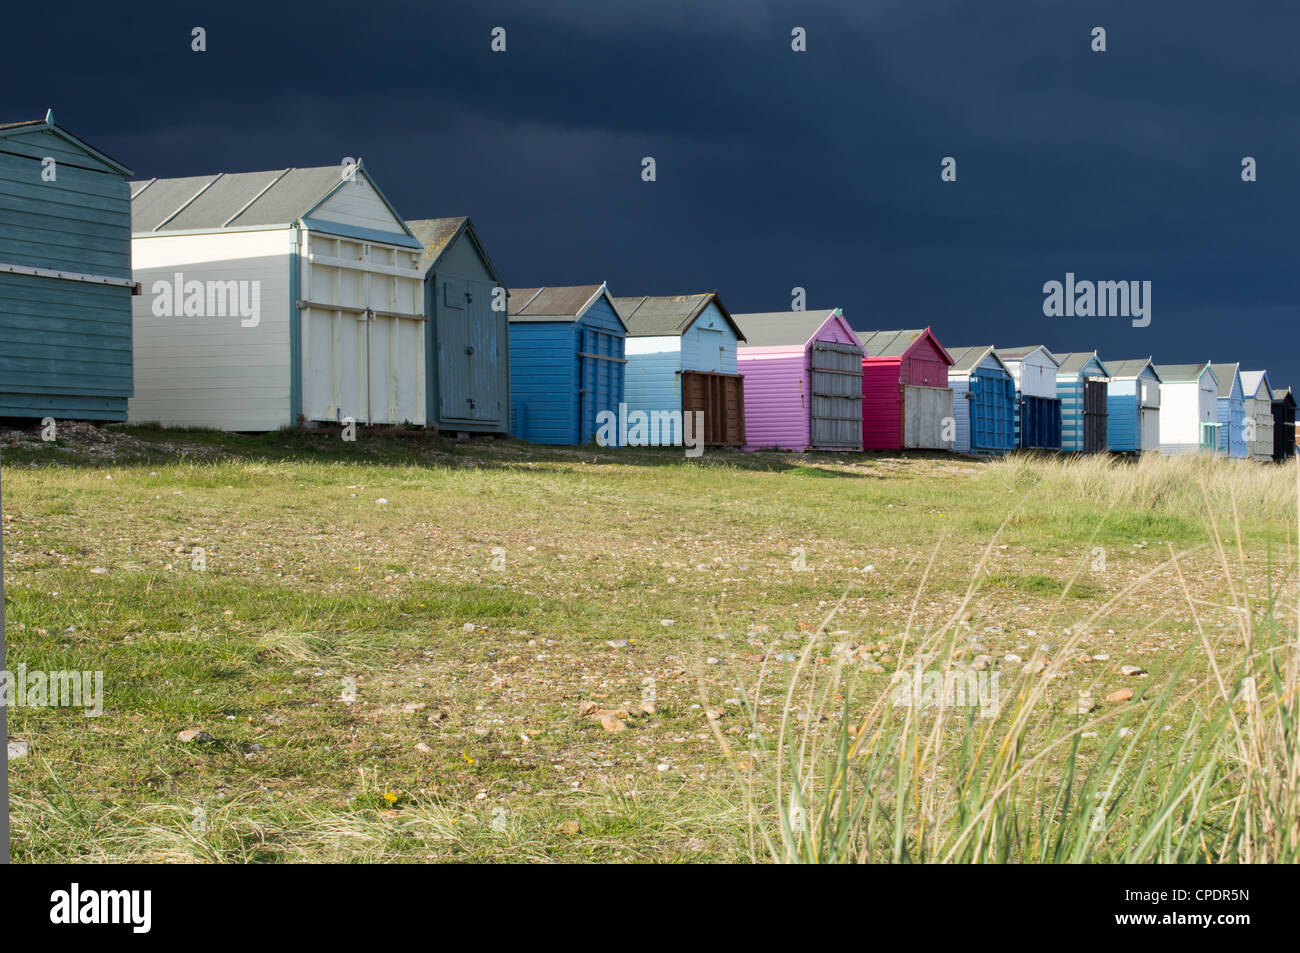 Beach huts in the sun with a dark, moody sky Stock Photo